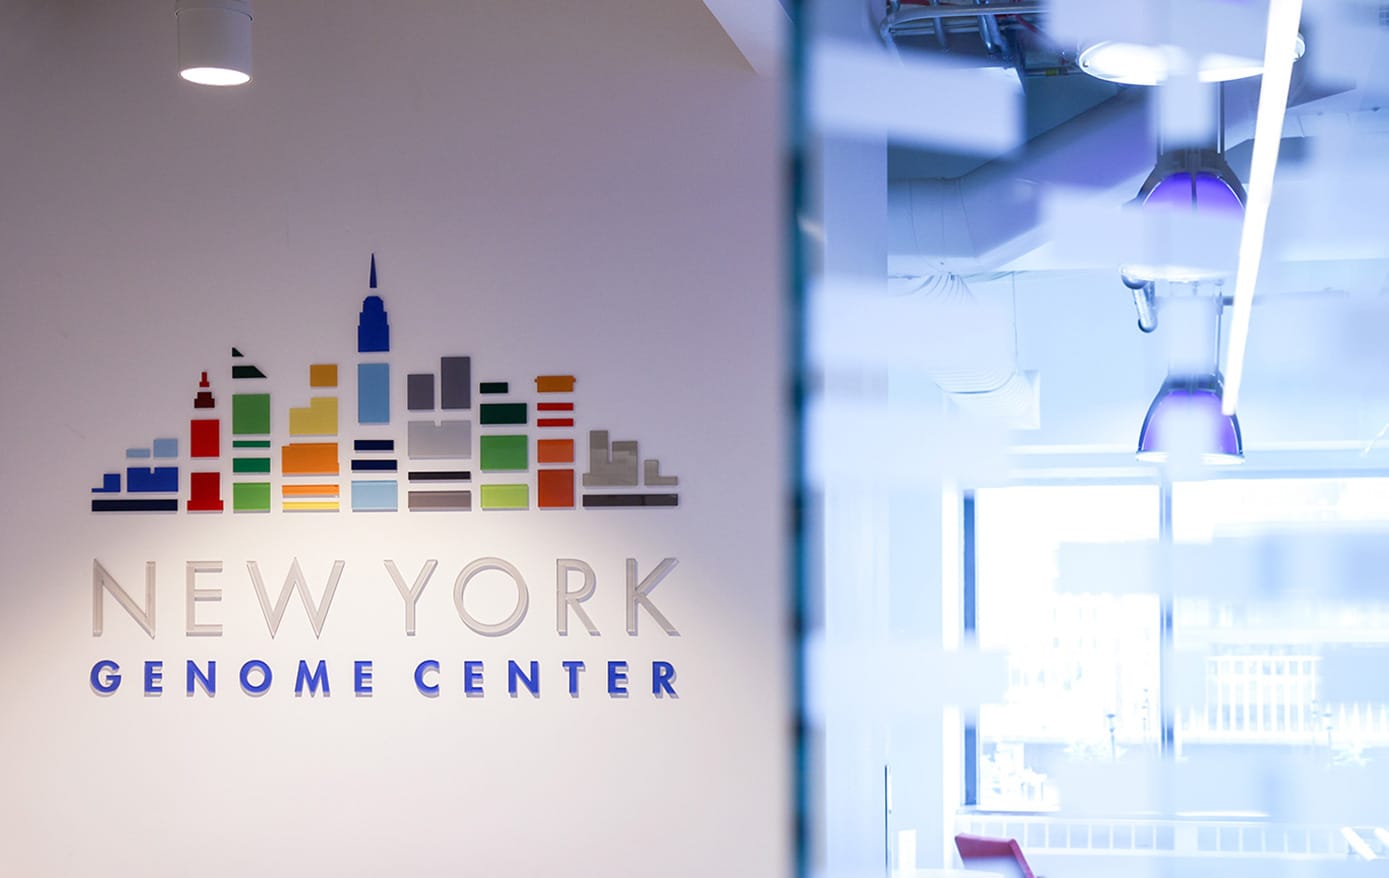 New York Genome Center logo on the wall of the interior space